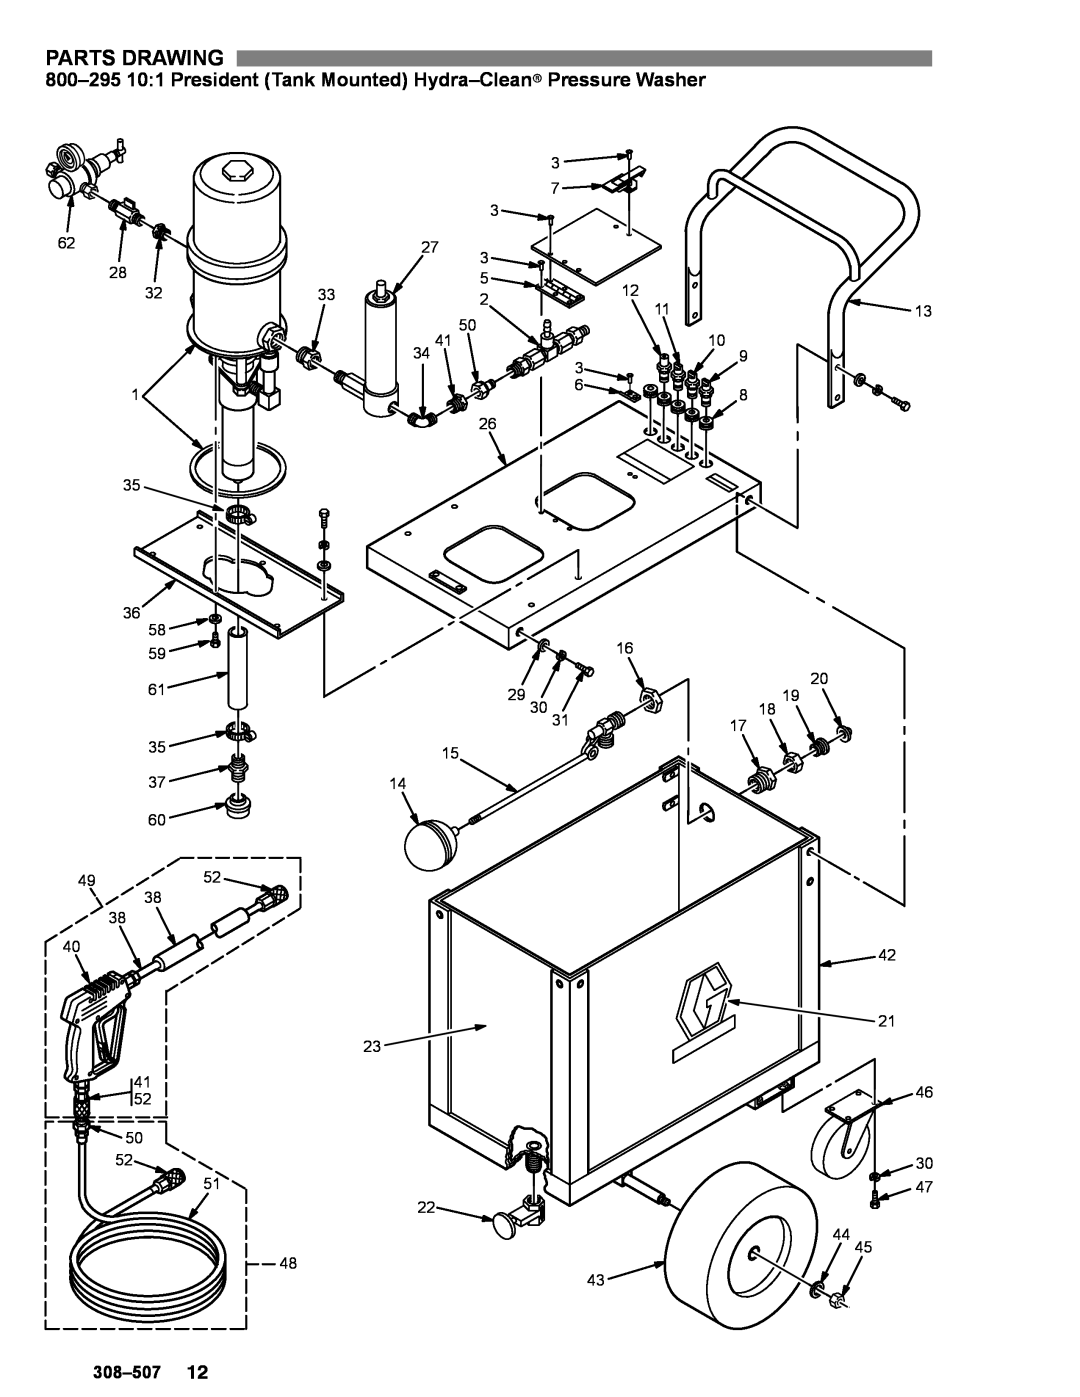 Graco Inc 308-507, 800413, 800412, 800295 Parts Drawing, 800-295 101 President Tank Mounted Hydra-Cleanr Pressure Washer 